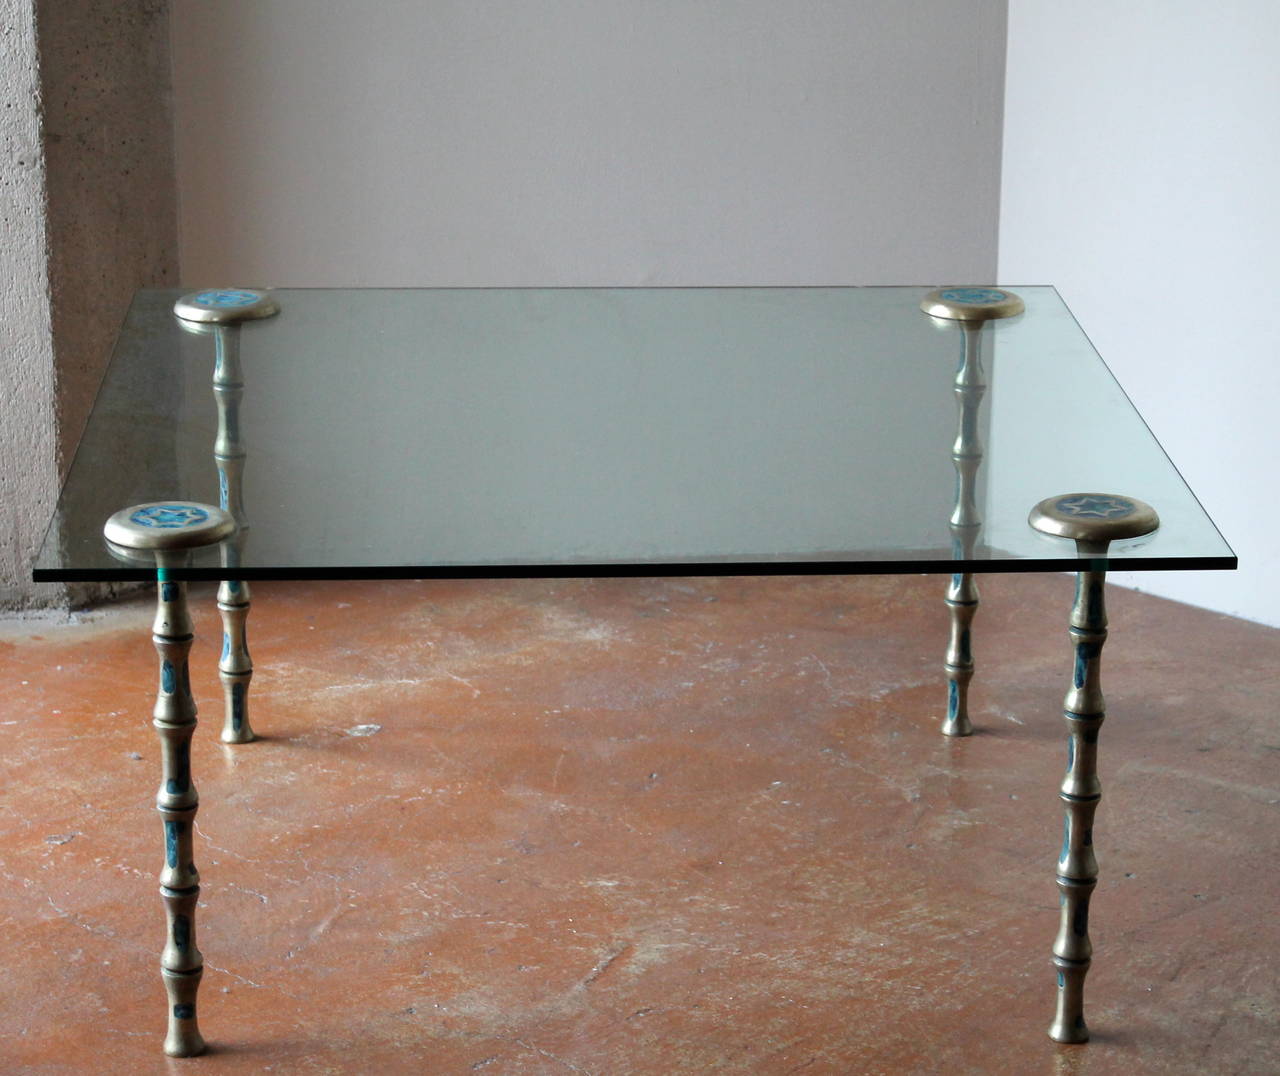 Mid-20th Century Rare Brass Bamboo Coffee Table by Pepe Mendoza, Mexico City, 1958 For Sale